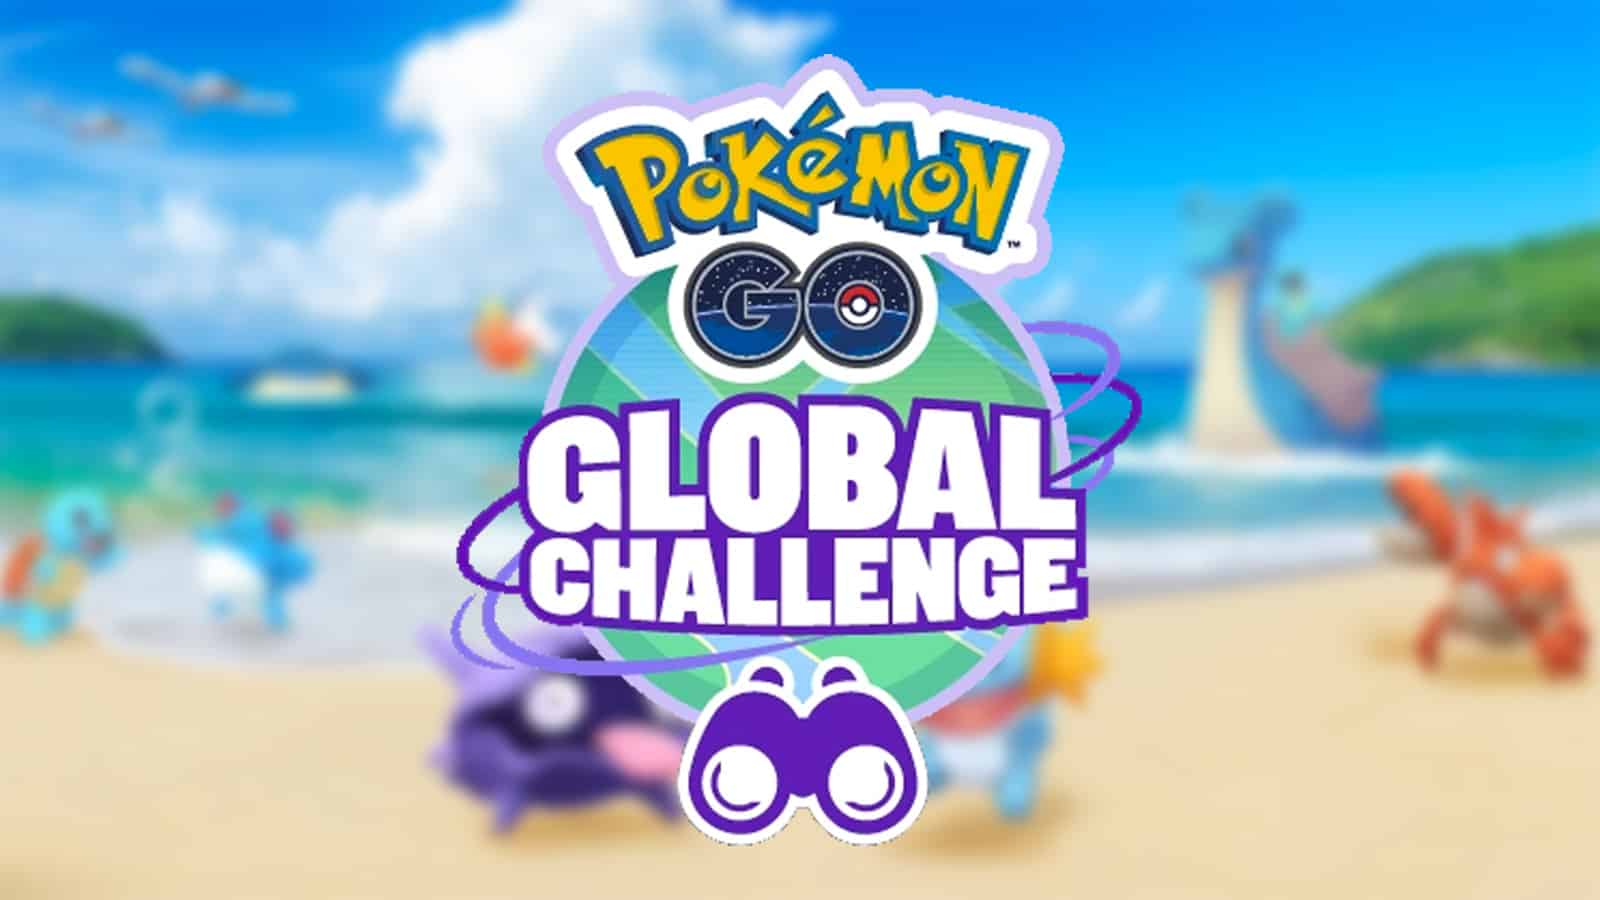 A poster for the Pokemon Go Global Challenge in the Water Festival